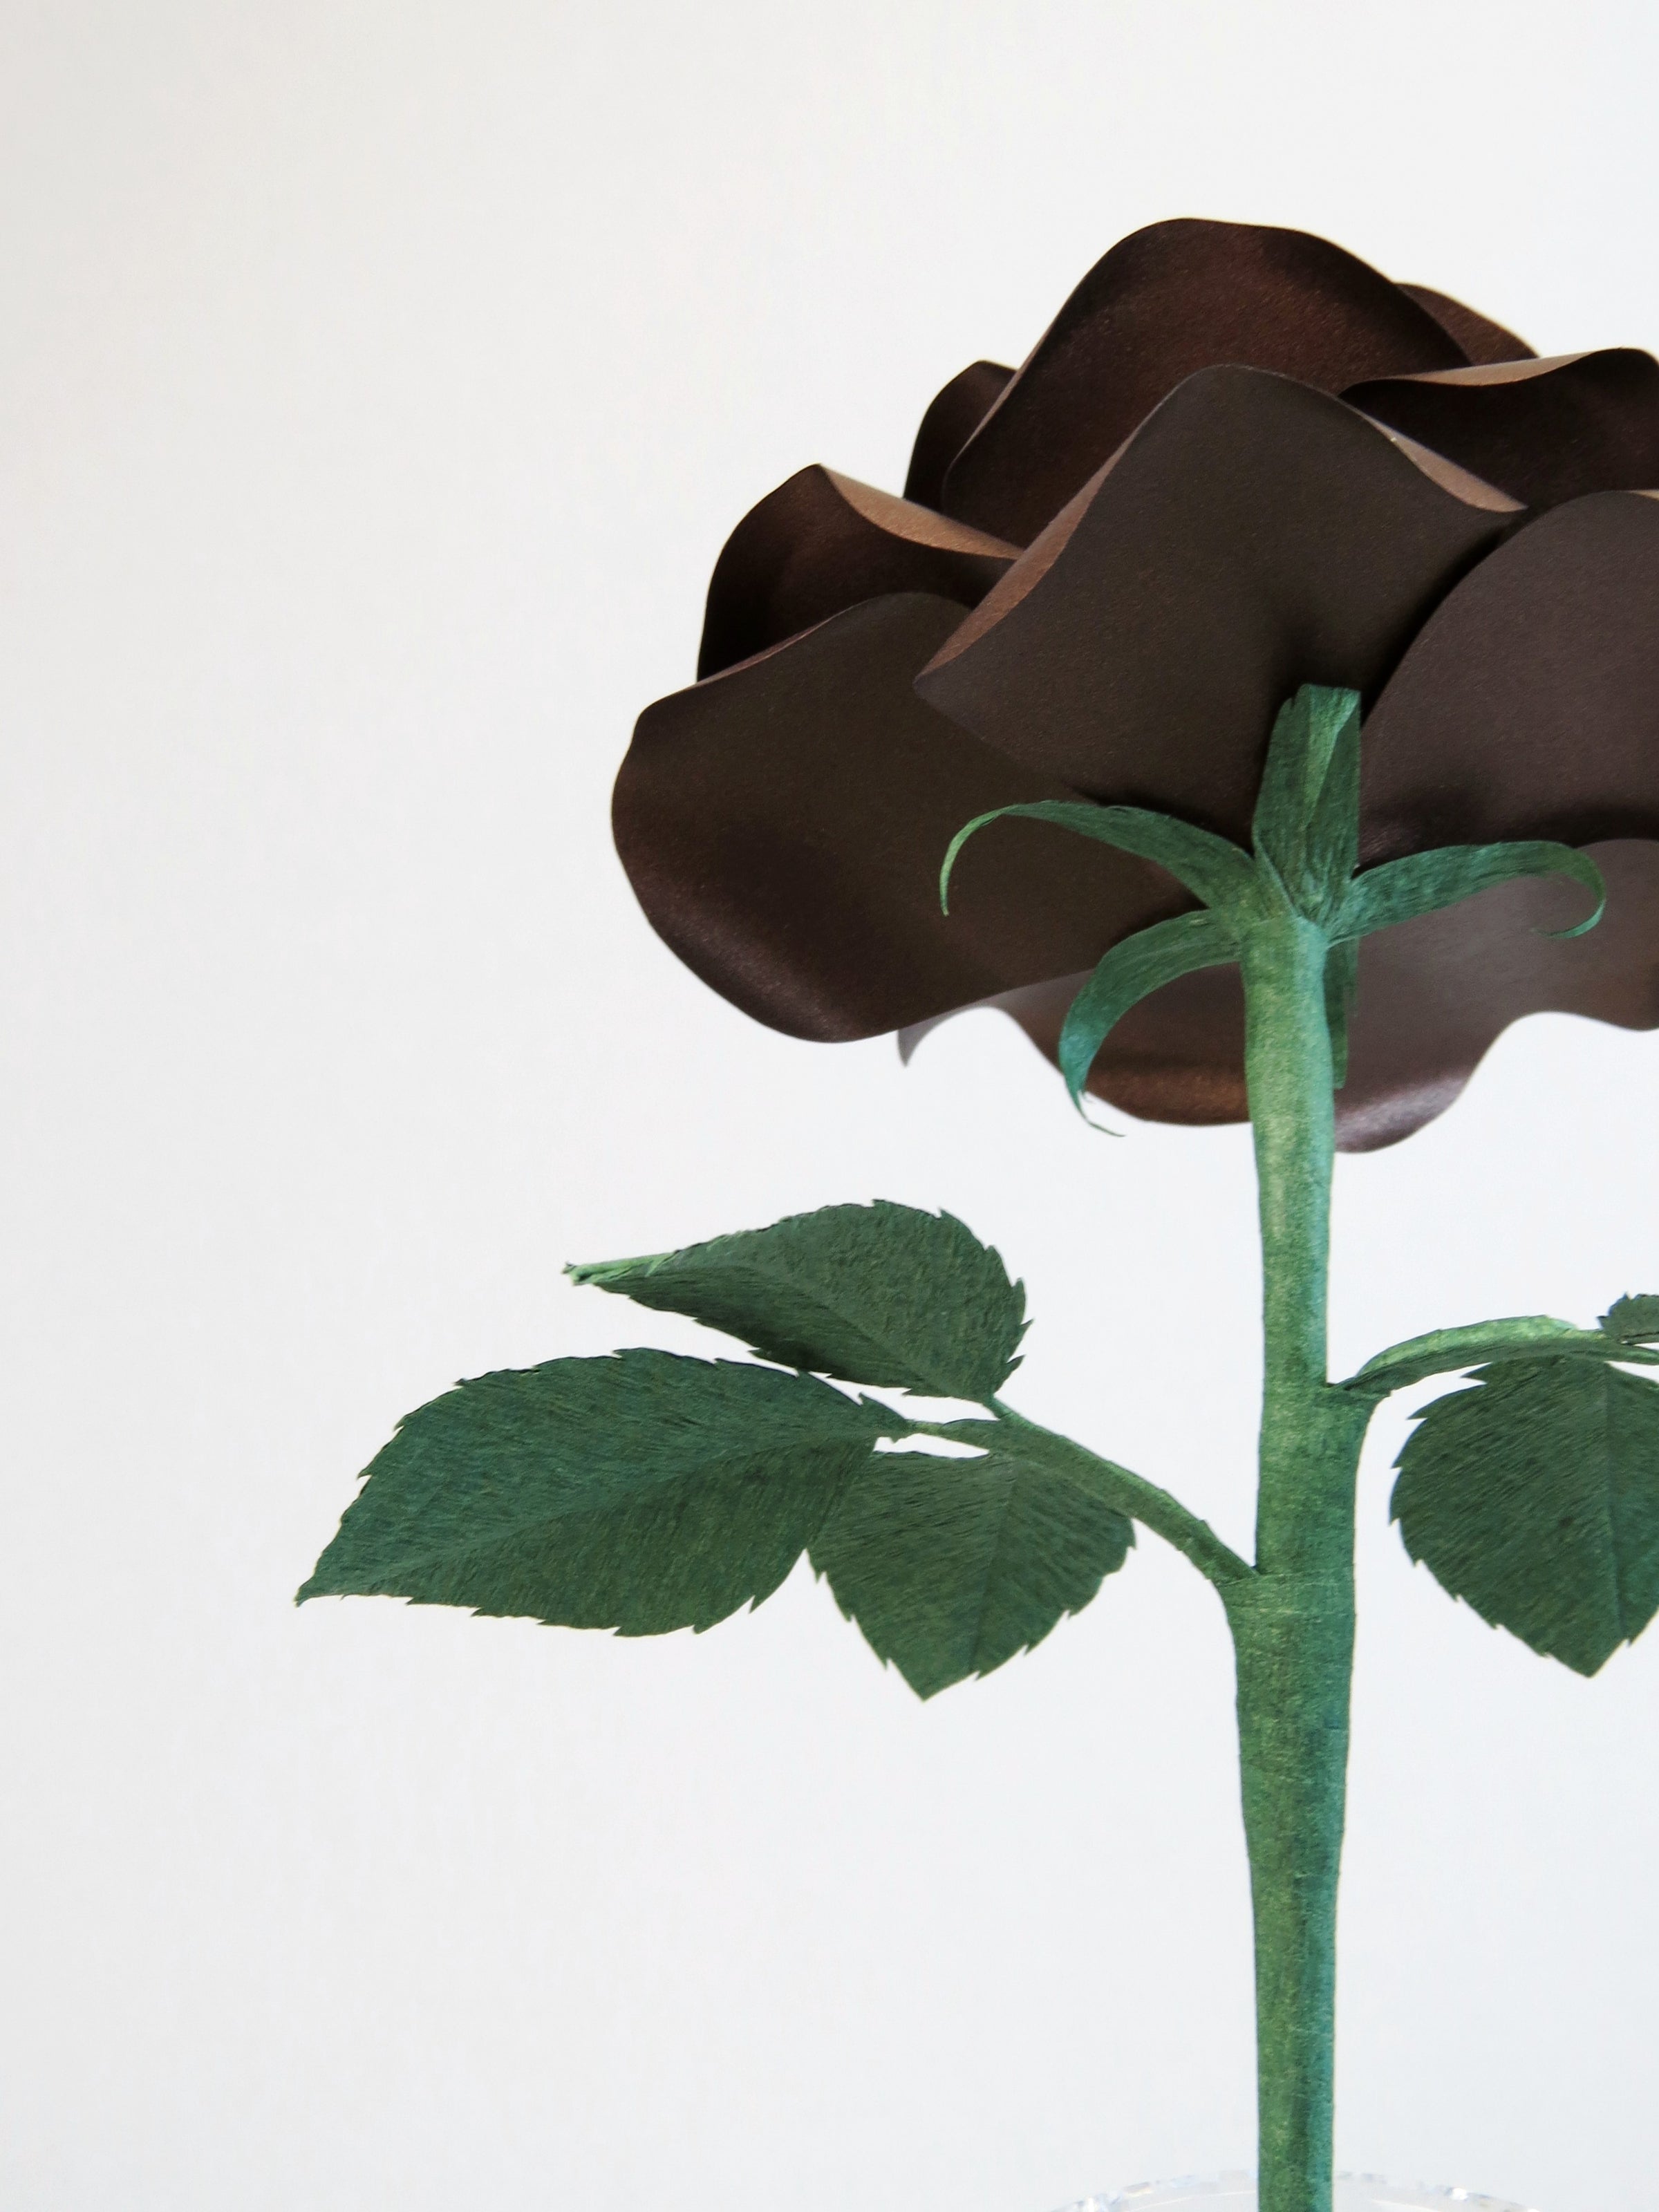 Detailed view of the back of a bronze paper rose with a green curled calyx underneath the metallic petals, and the forest green stem and leaves just in view